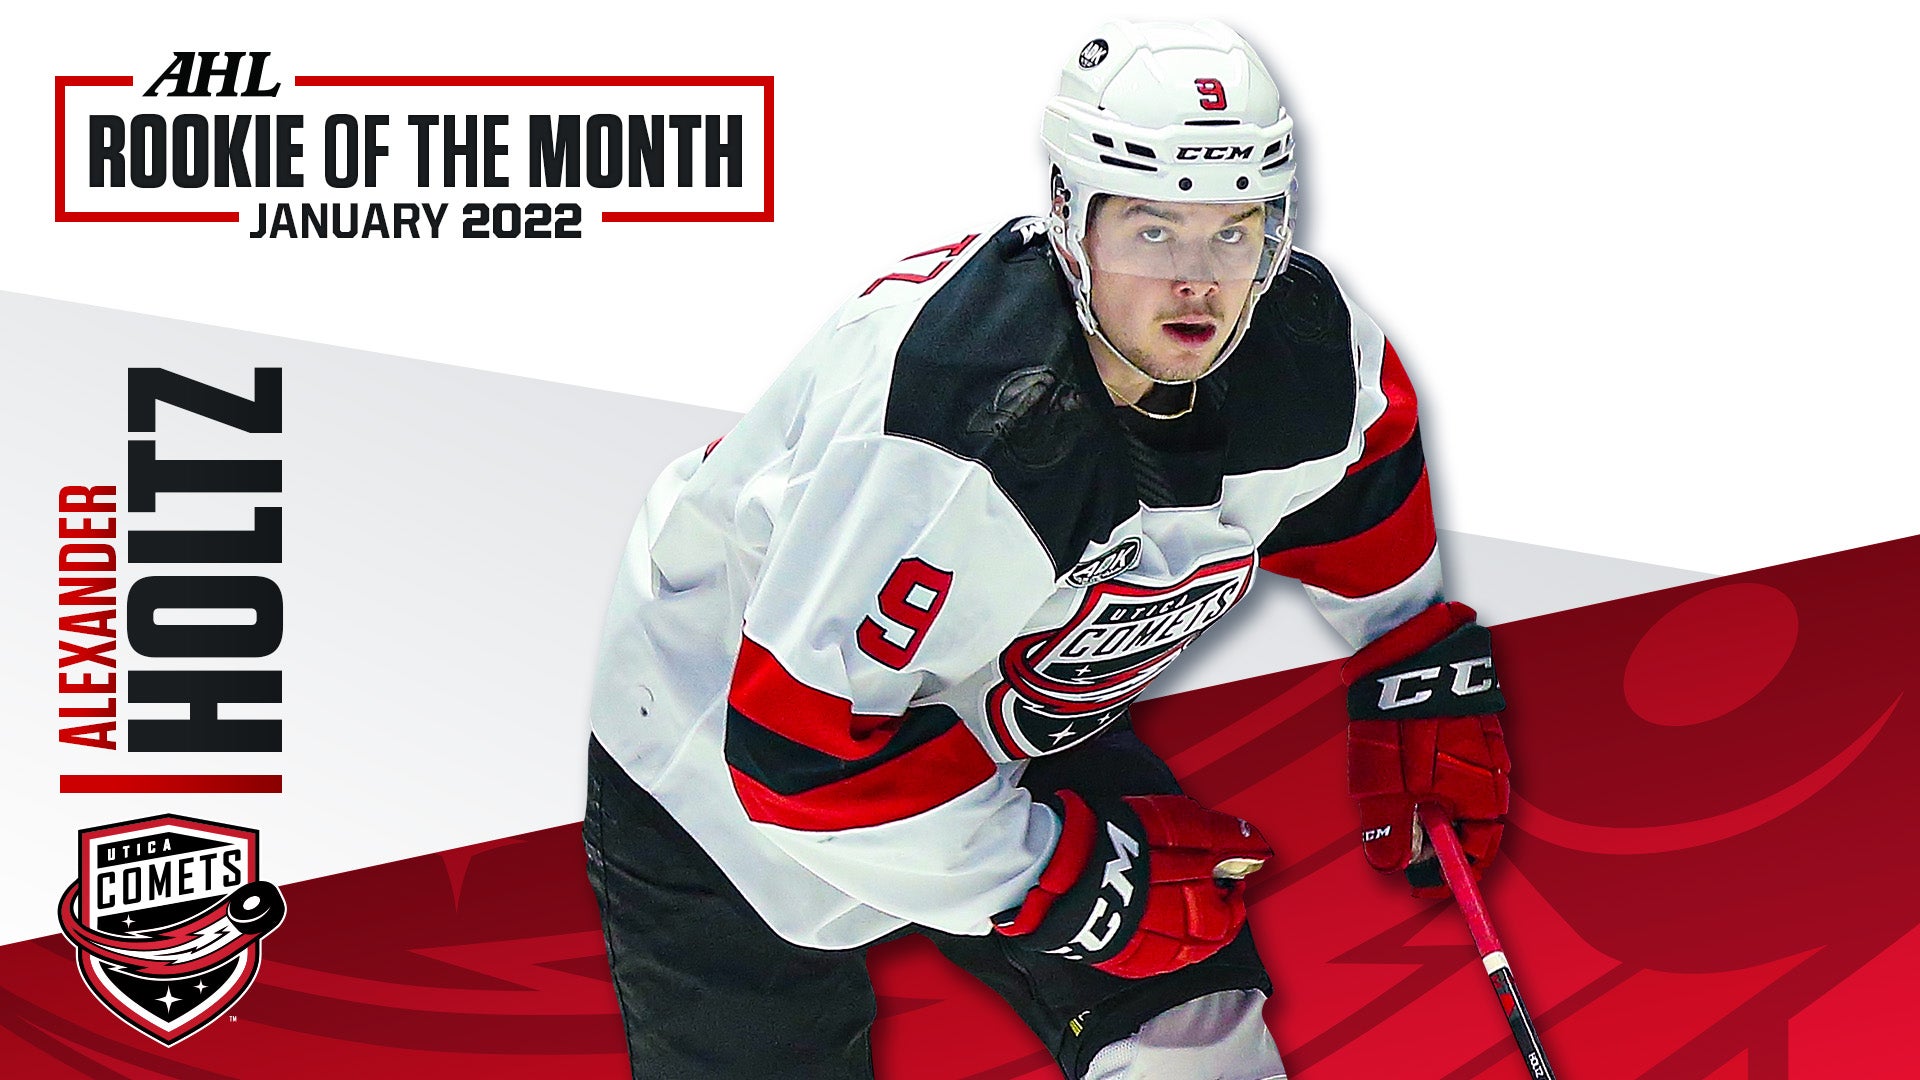 ALEX HOLTZ NAMED AHL ROOKIE OF THE MONTH